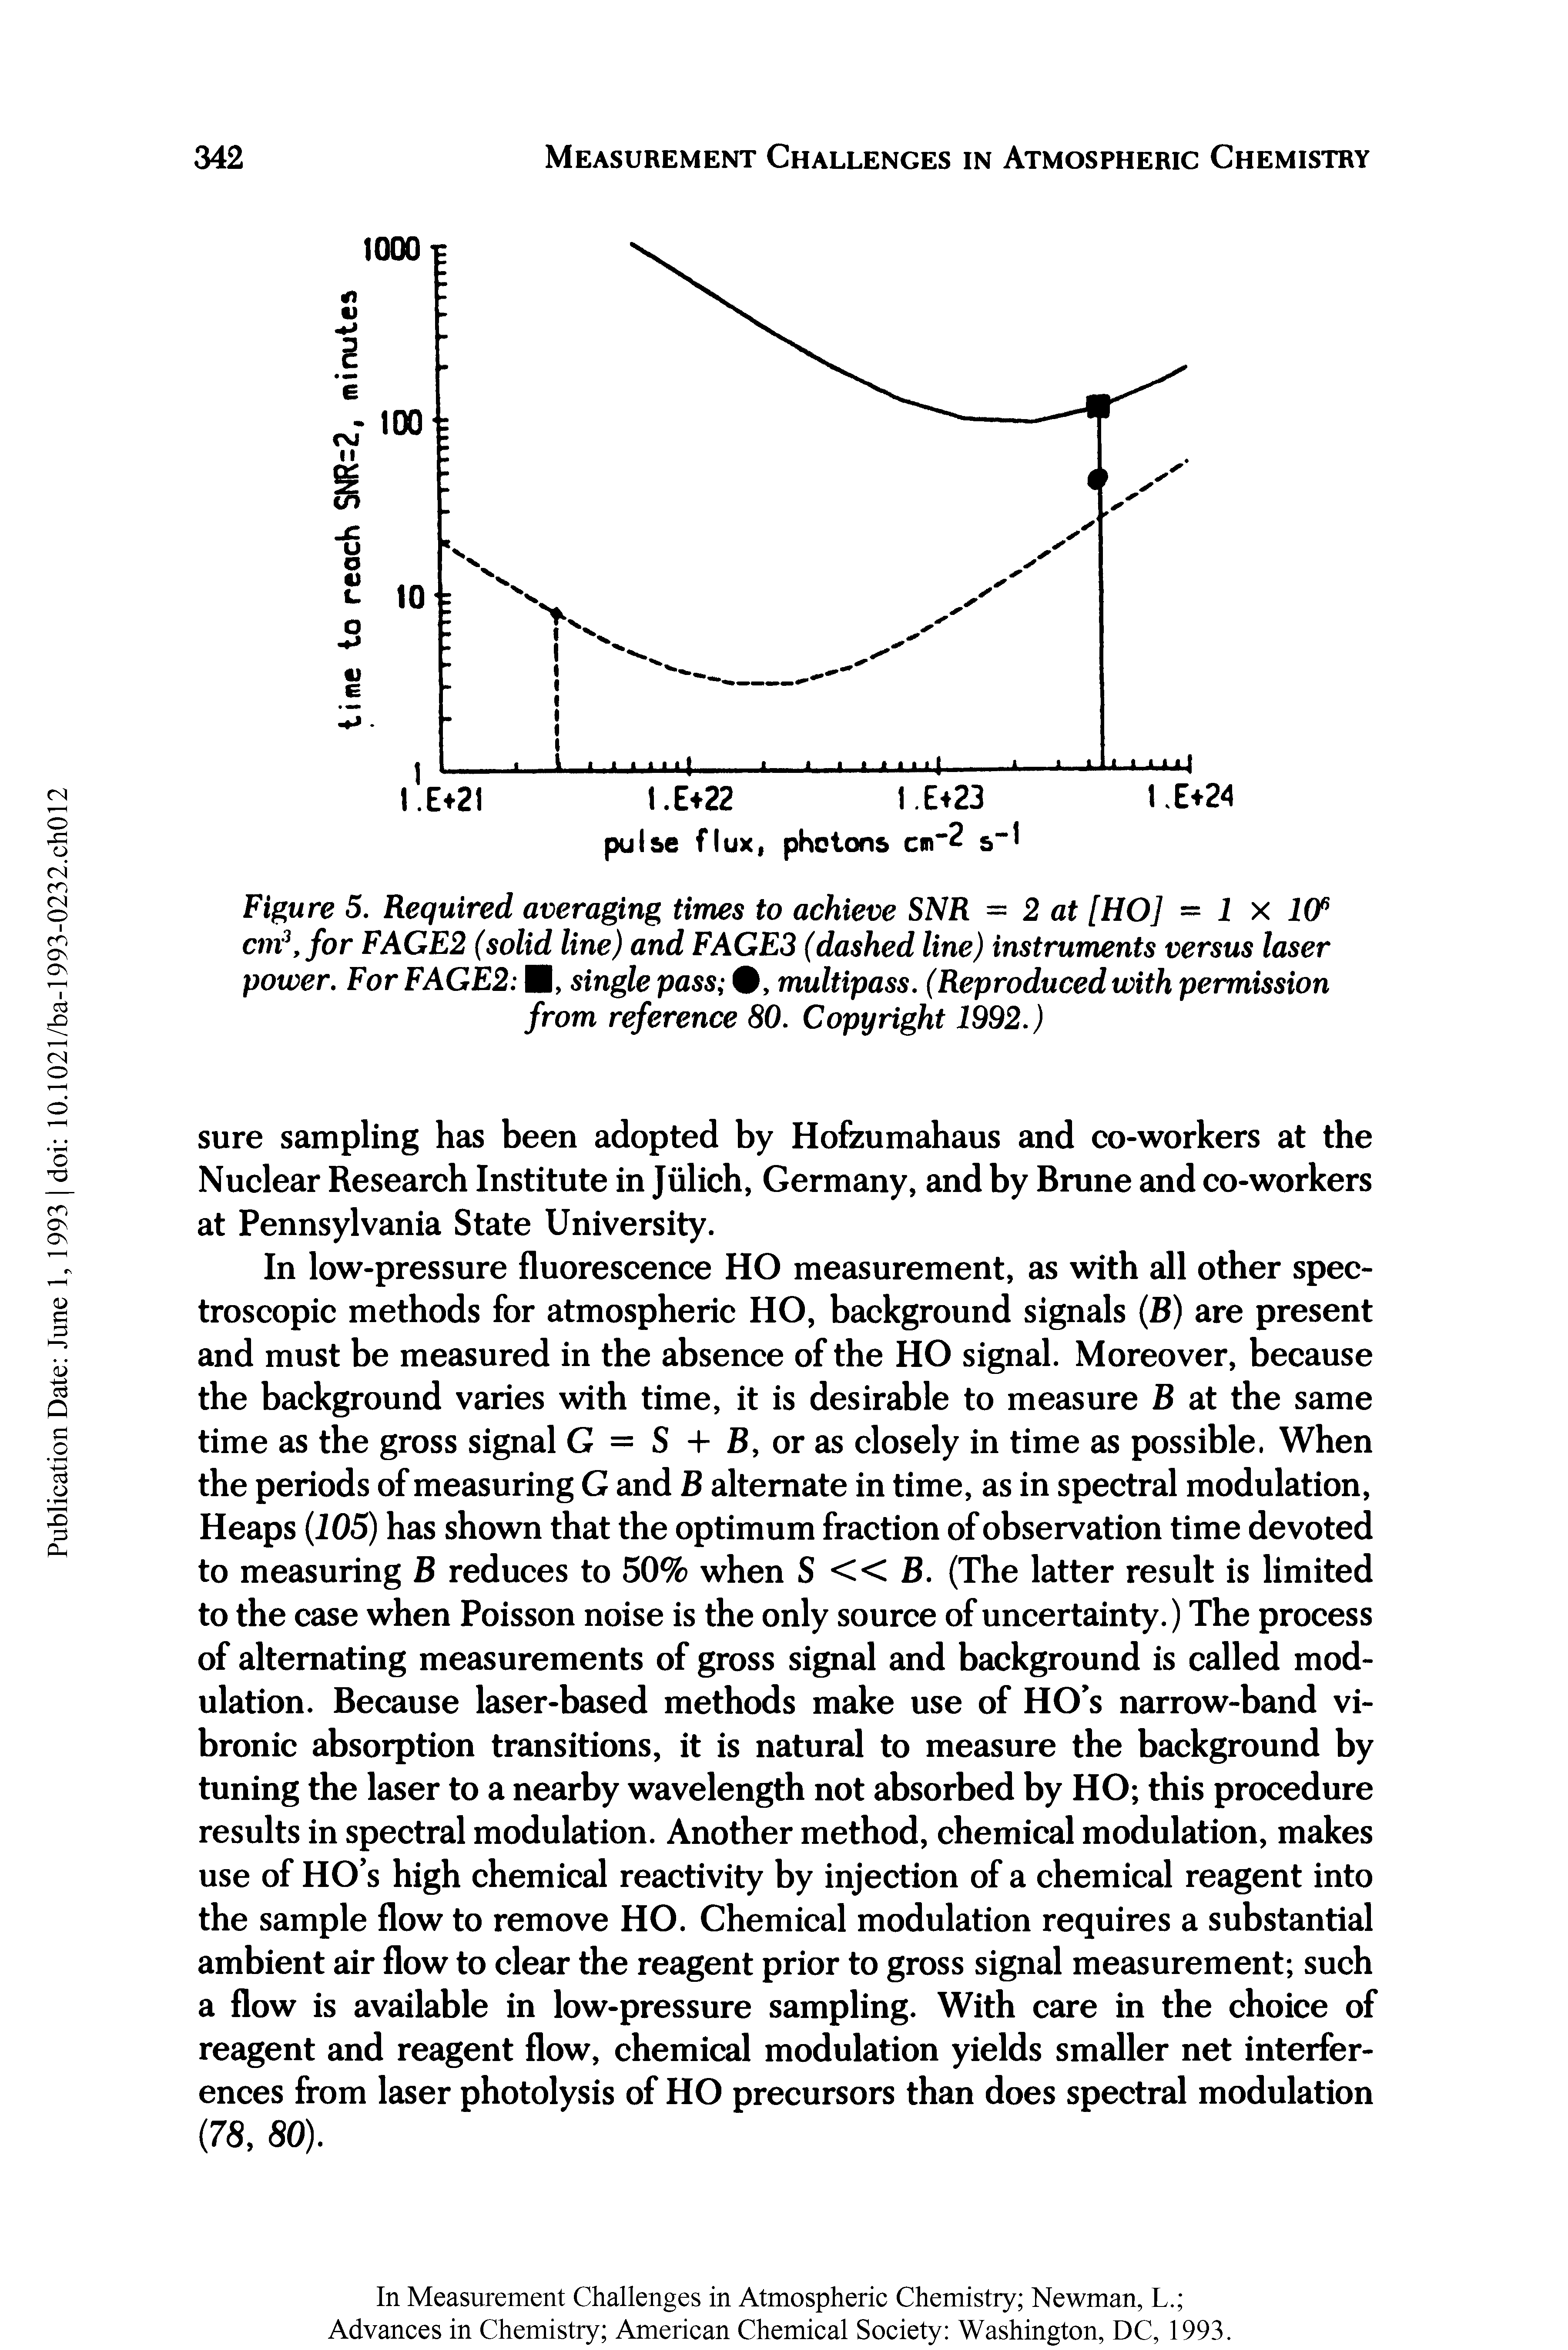 Figure 5. Required averaging times to achieve SNR = 2 at [HO] - 1 x 106 cm3, for FAGE2 (solid line) and FAGE3 (dashed line) instruments versus laser power. ForFAGE2 H, single pass 0, multipass. (Reproduced with permission from reference 80. Copyright 1992.)...